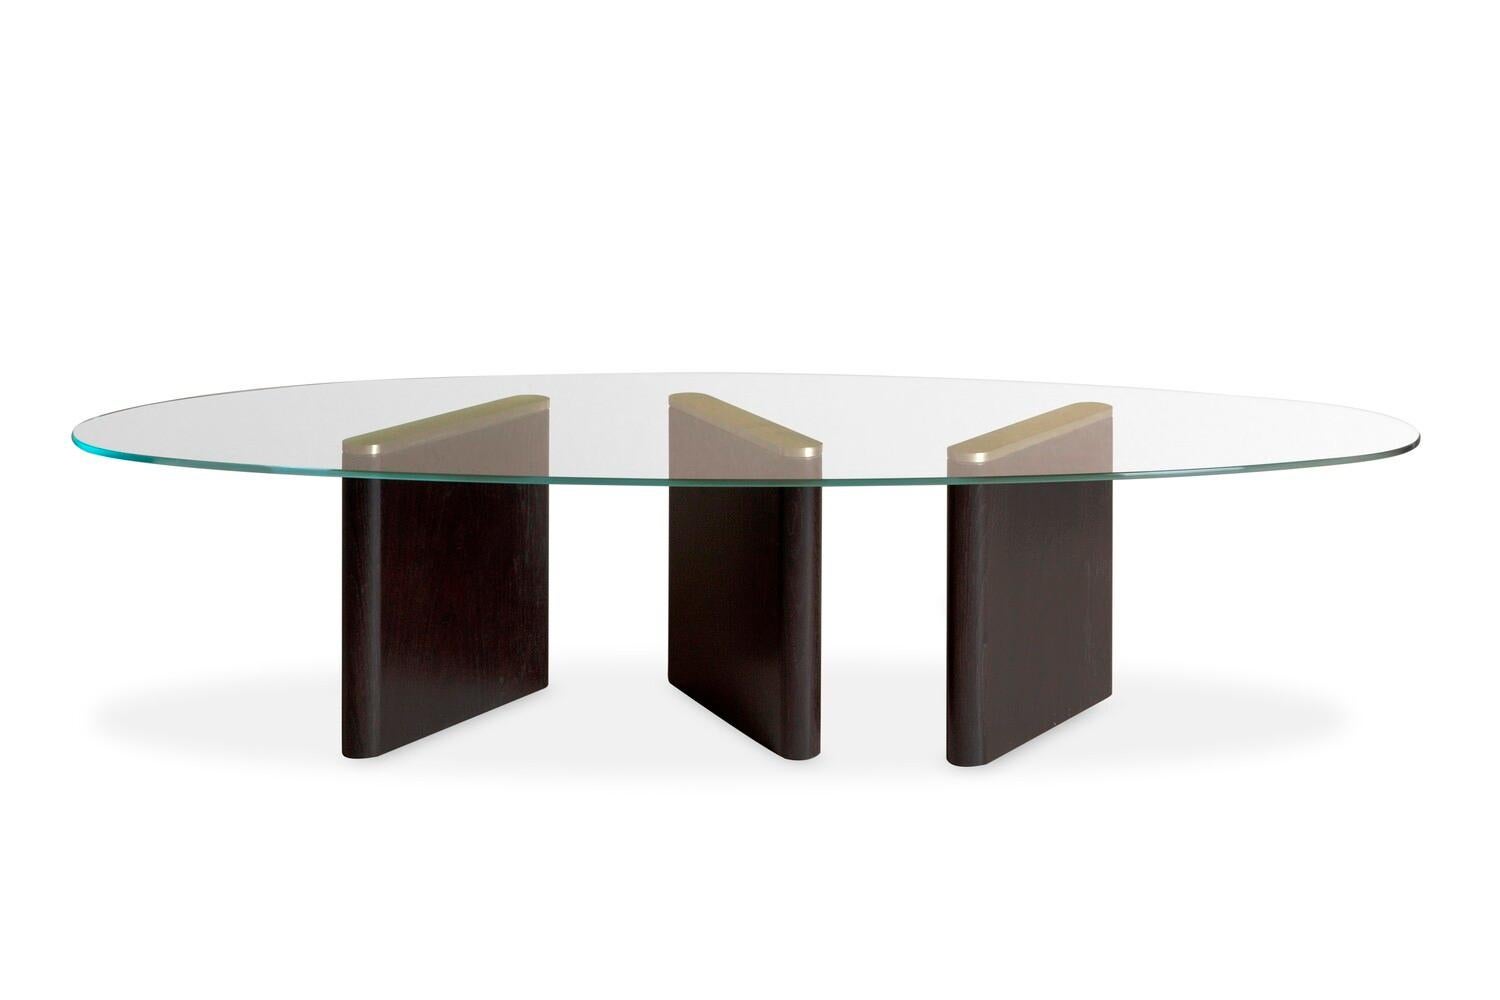 The Regent coffee table has a striking, asymmetrical 8mm glass top. Its angled legs, crafted in oak with glamorous brushed brass accents, are on full show beneath. The result is a pared-back, contemporary design, which works beautifully both alone,